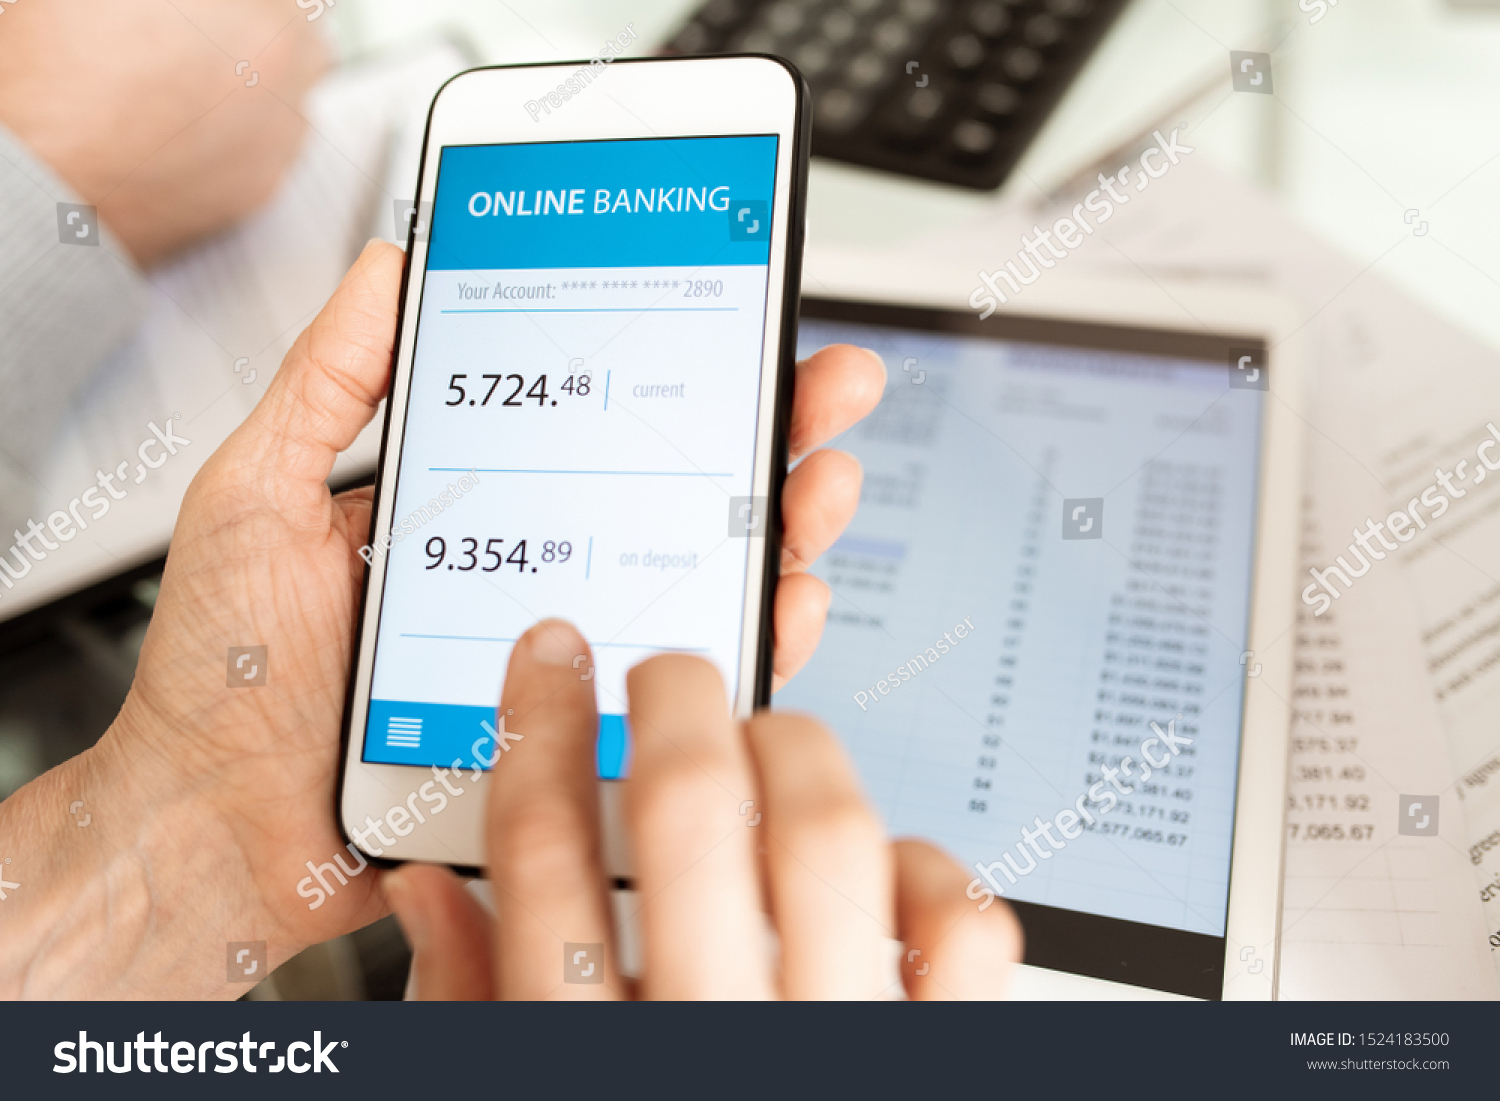 Hands of businessperson holding smartphone while scrolling through online banking account by workplace #1524183500